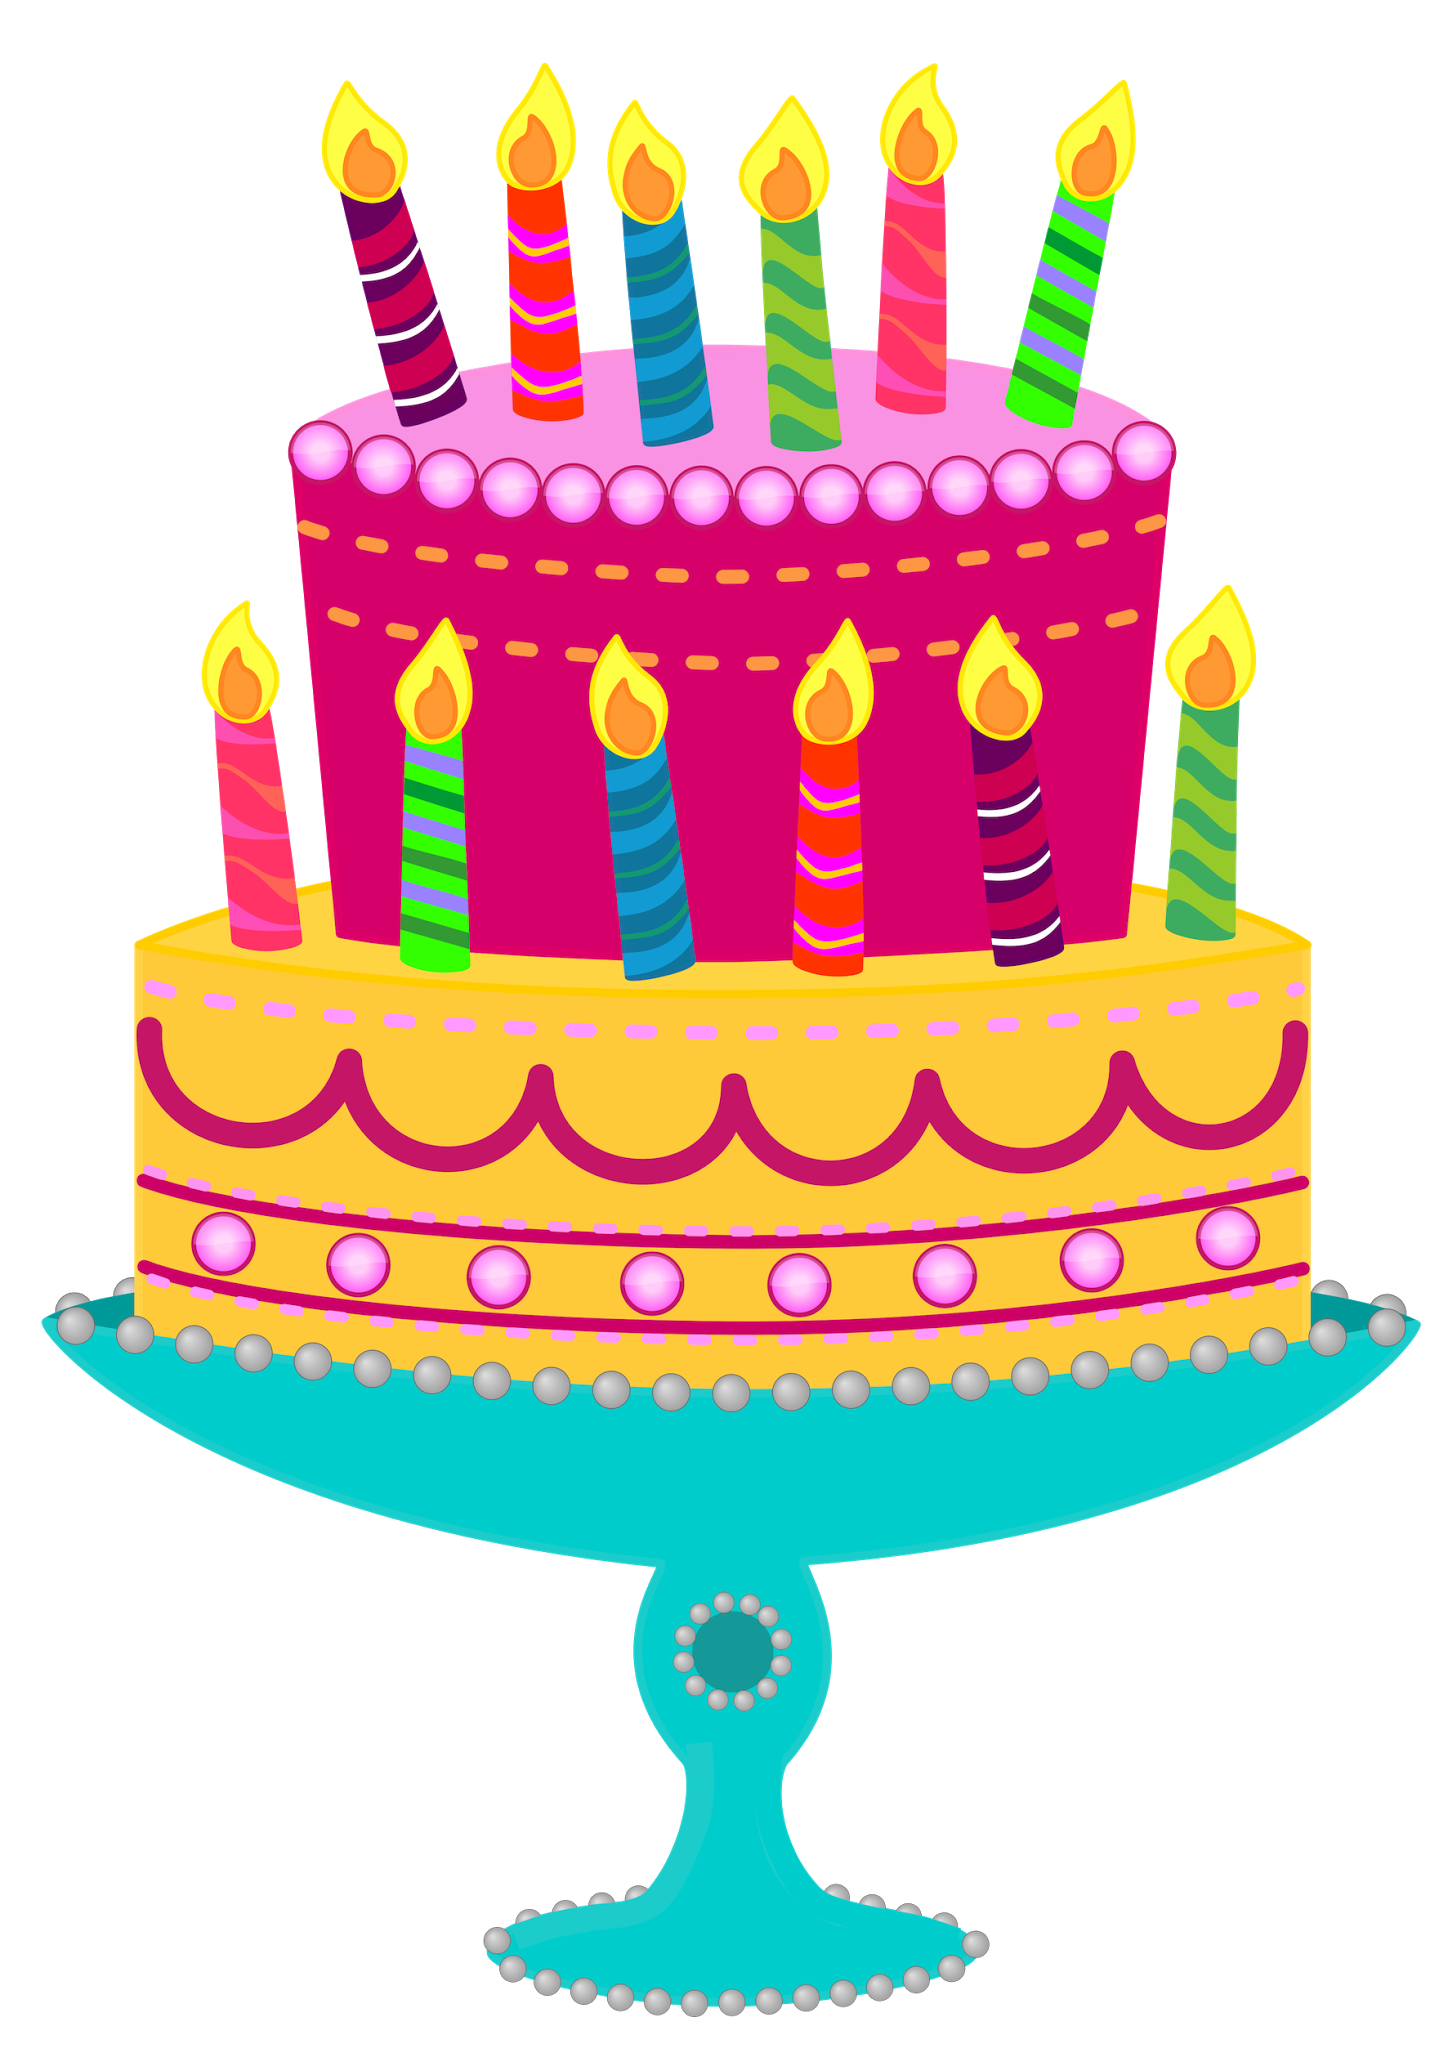 Birthday Cake Clipart PNG - 124434